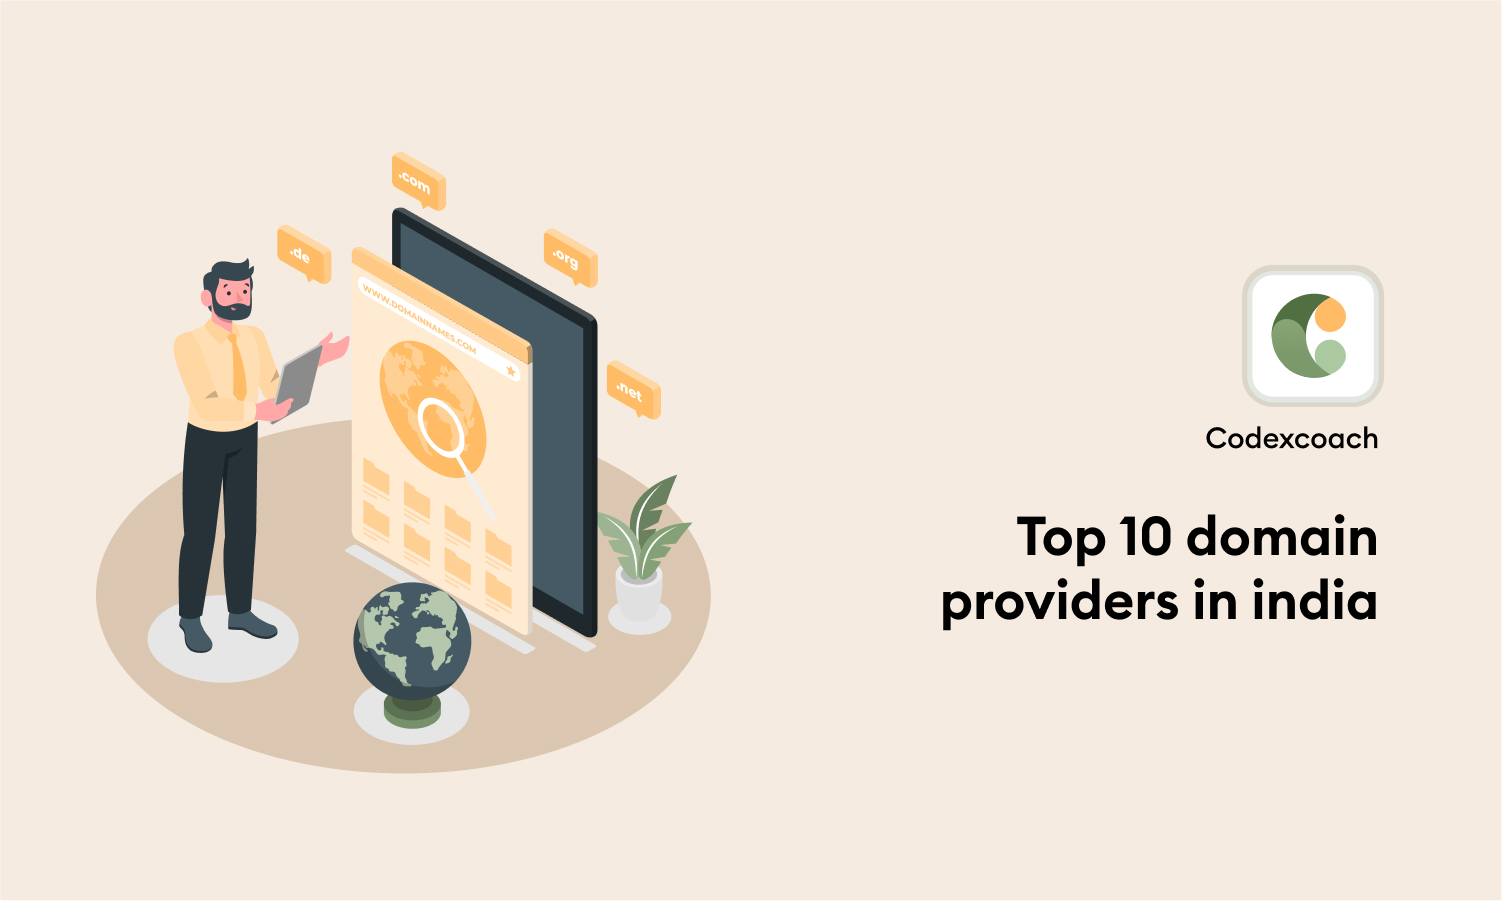 Top 10 domain providers in India